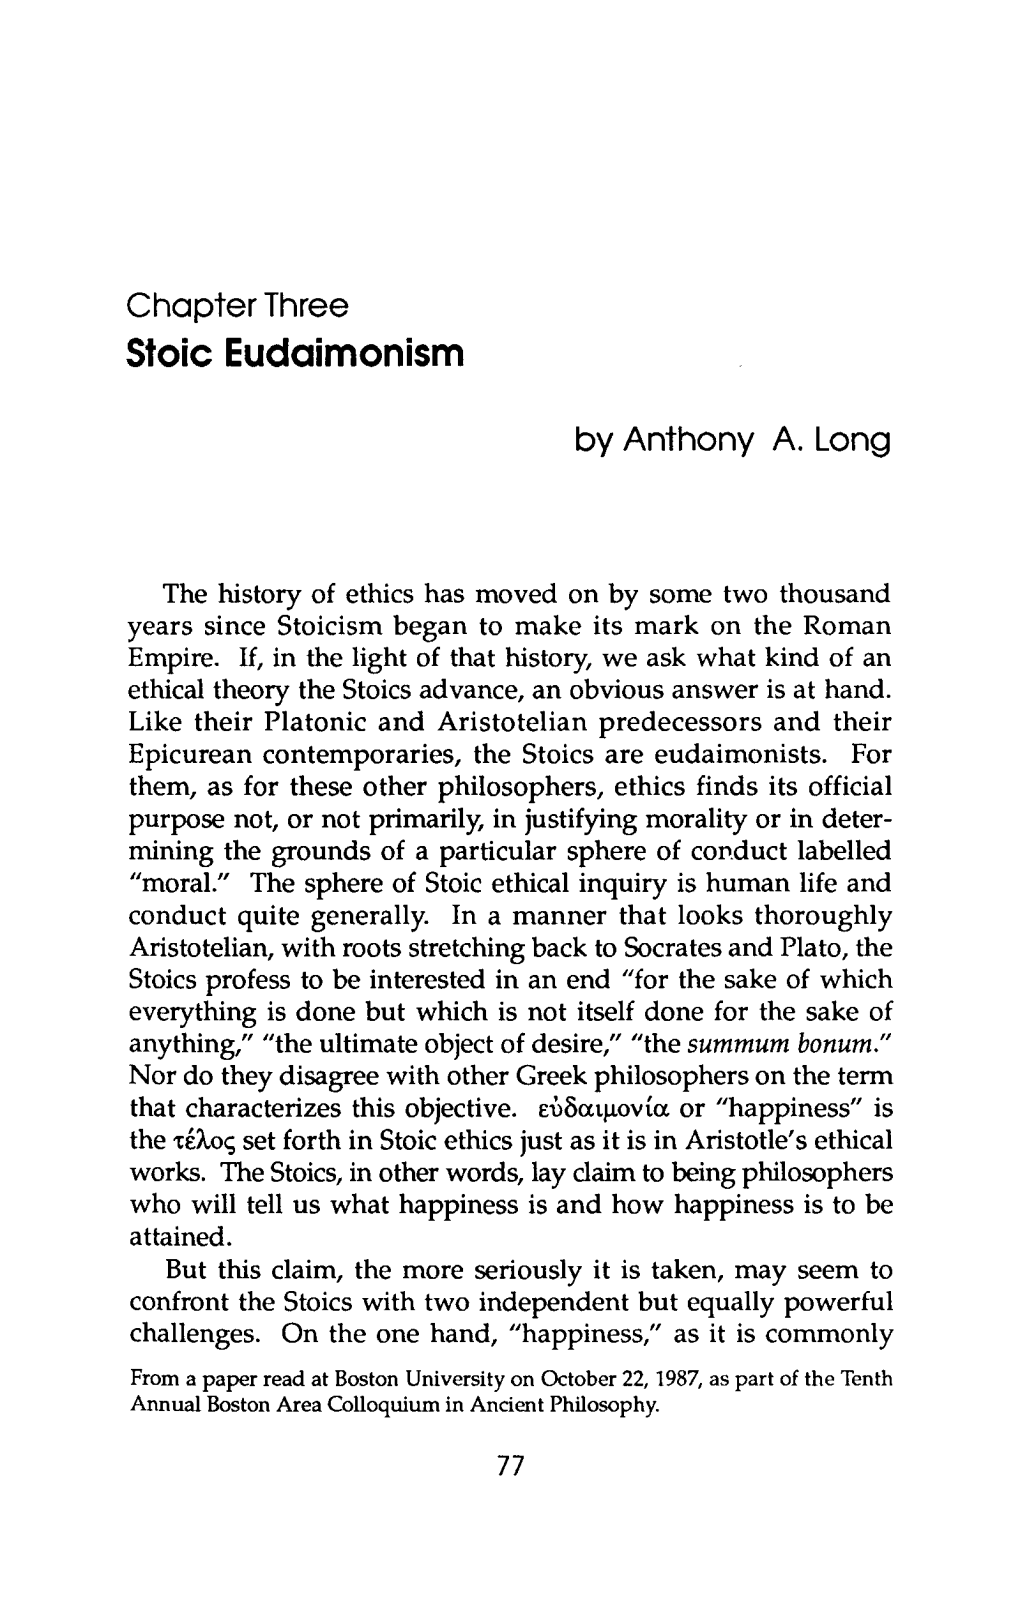 Chapter Three Stoic Eudaimonism by Anthony A. Long the History